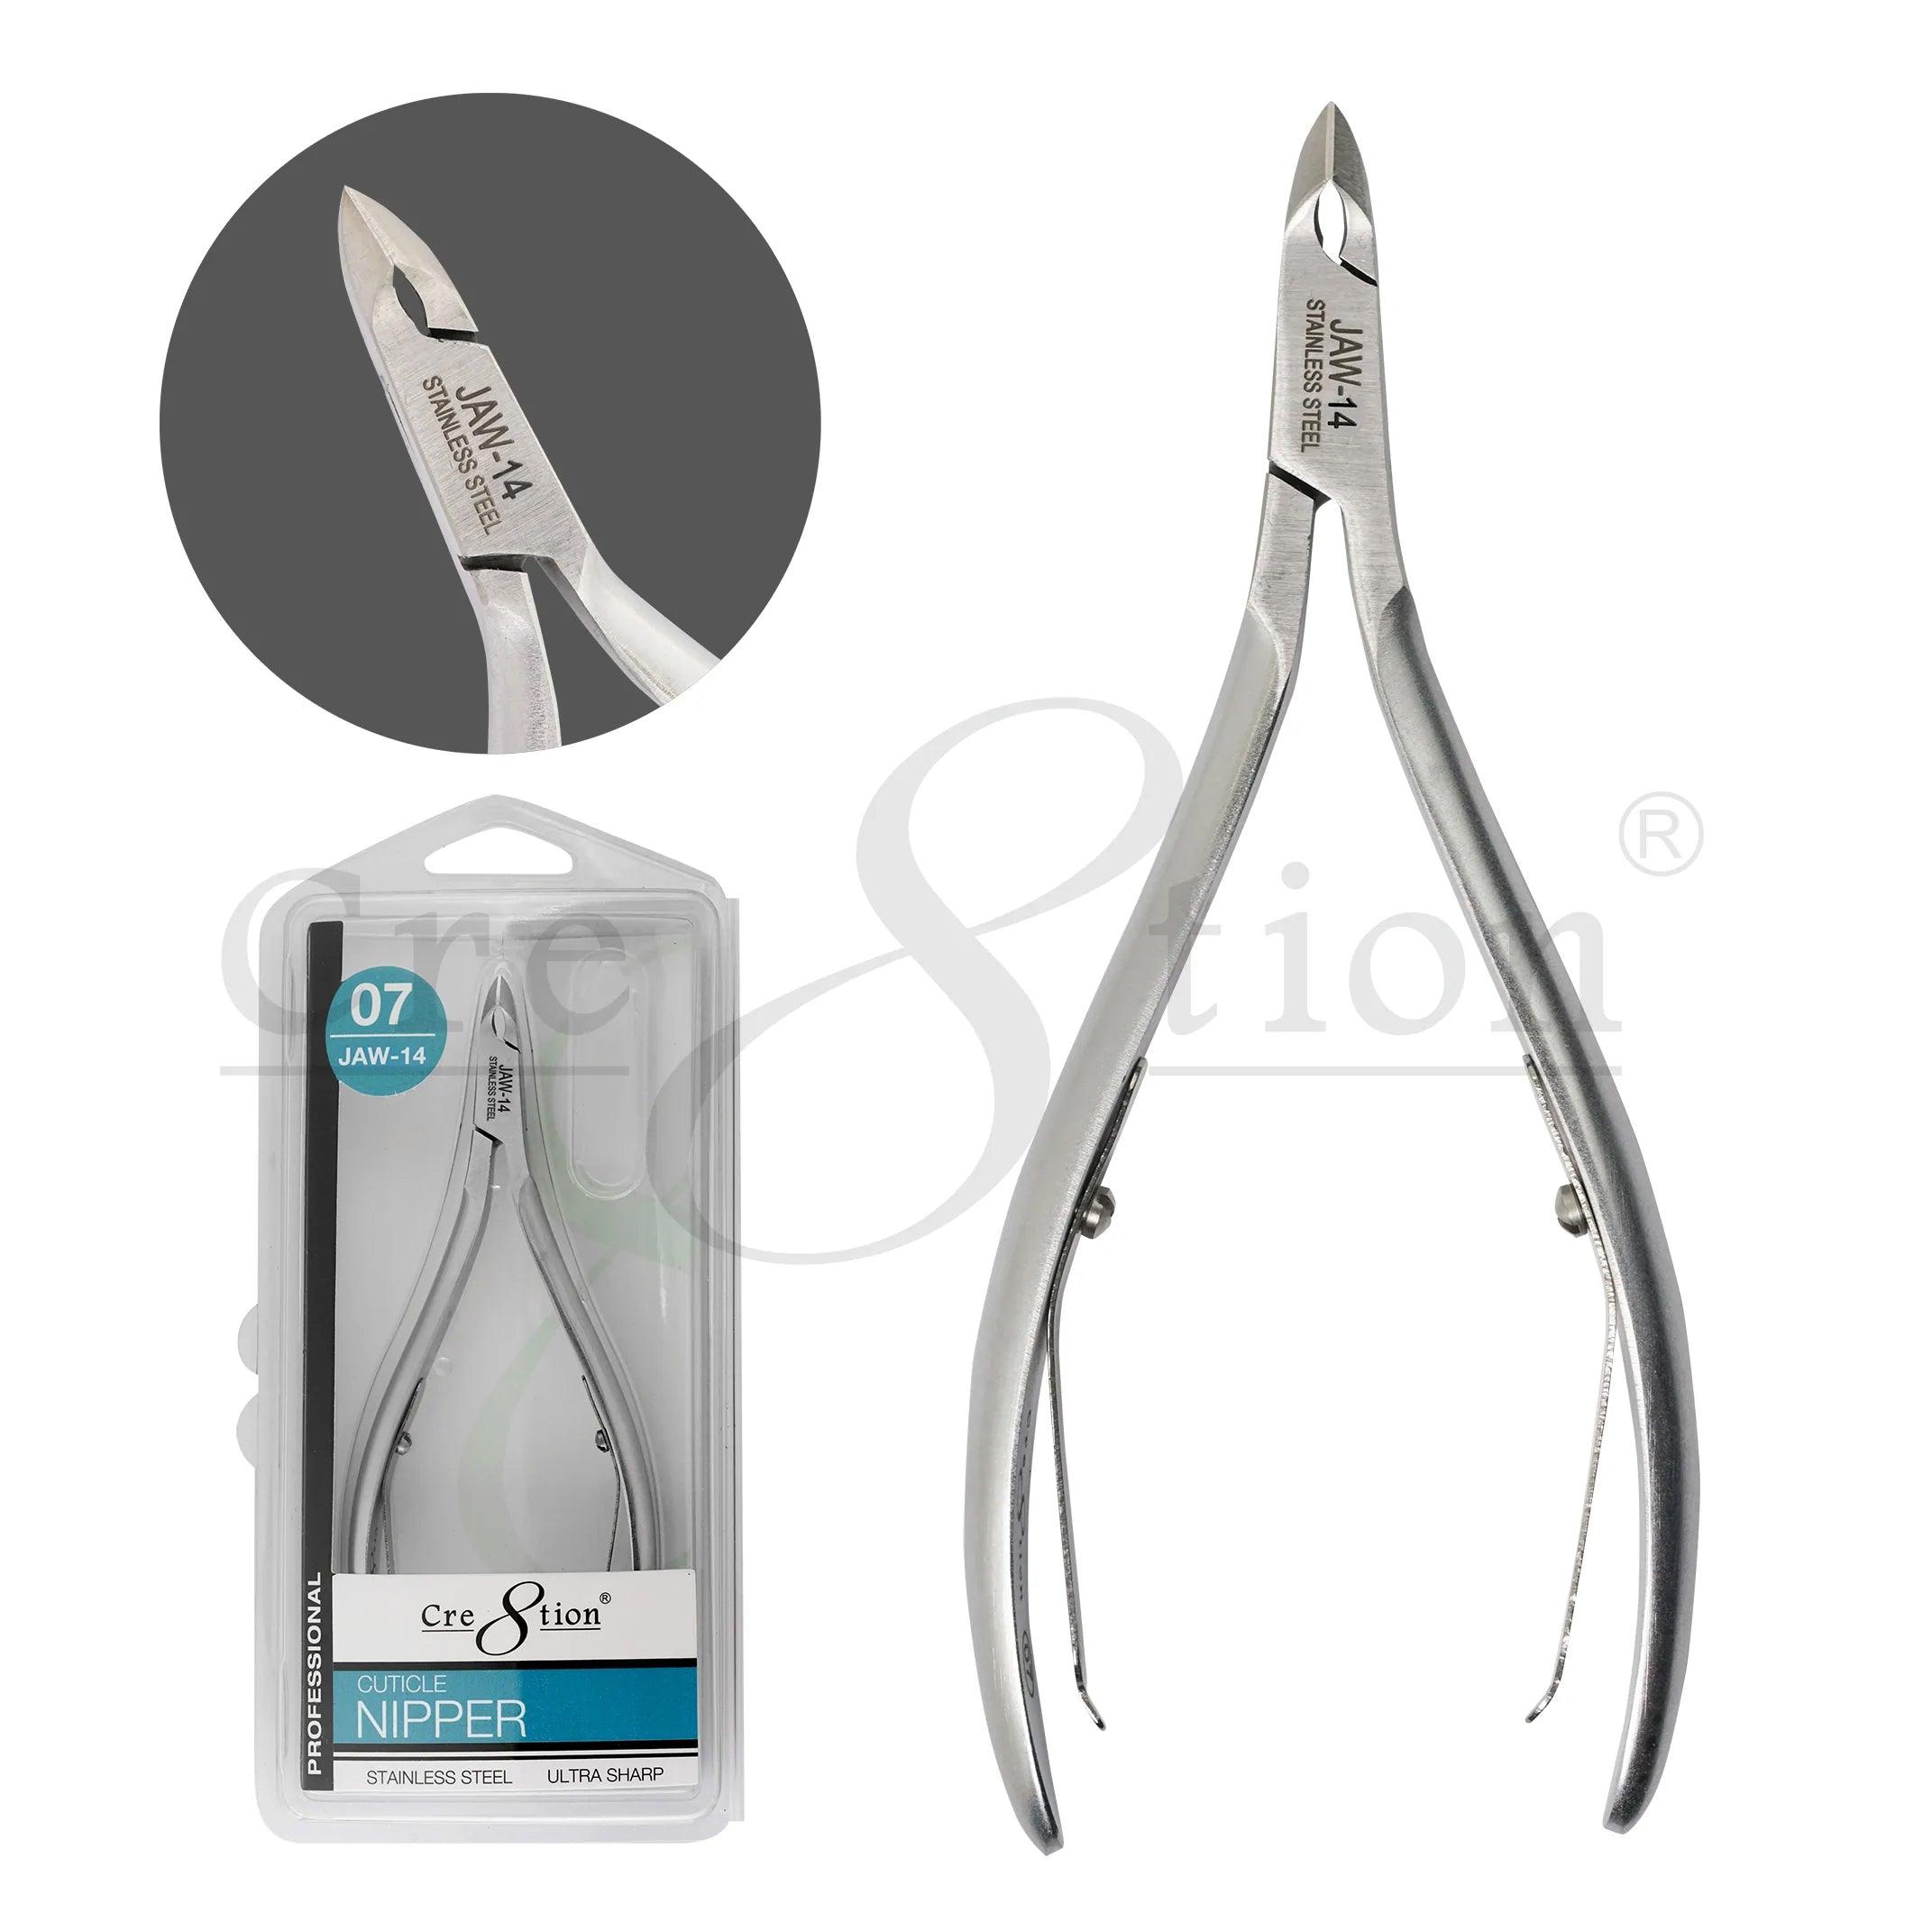 Cre8tion Stainless Steel Cuticle Nipper #07 Jaw 14